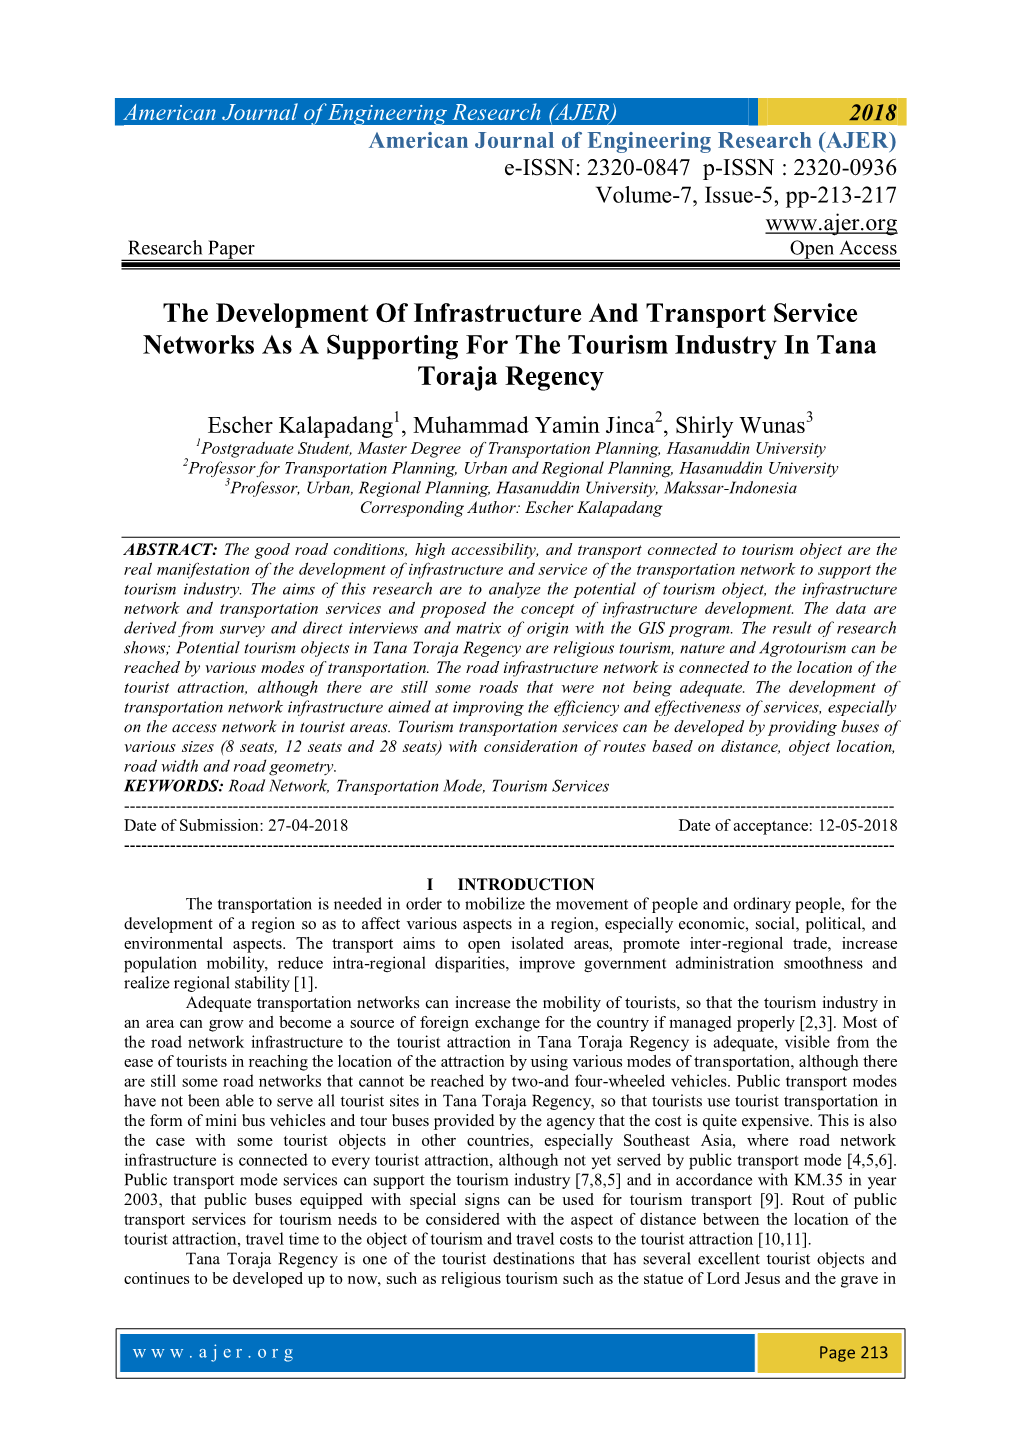 The Development of Infrastructure and Transport Service Networks As a Supporting for the Tourism Industry in Tana Toraja Regency